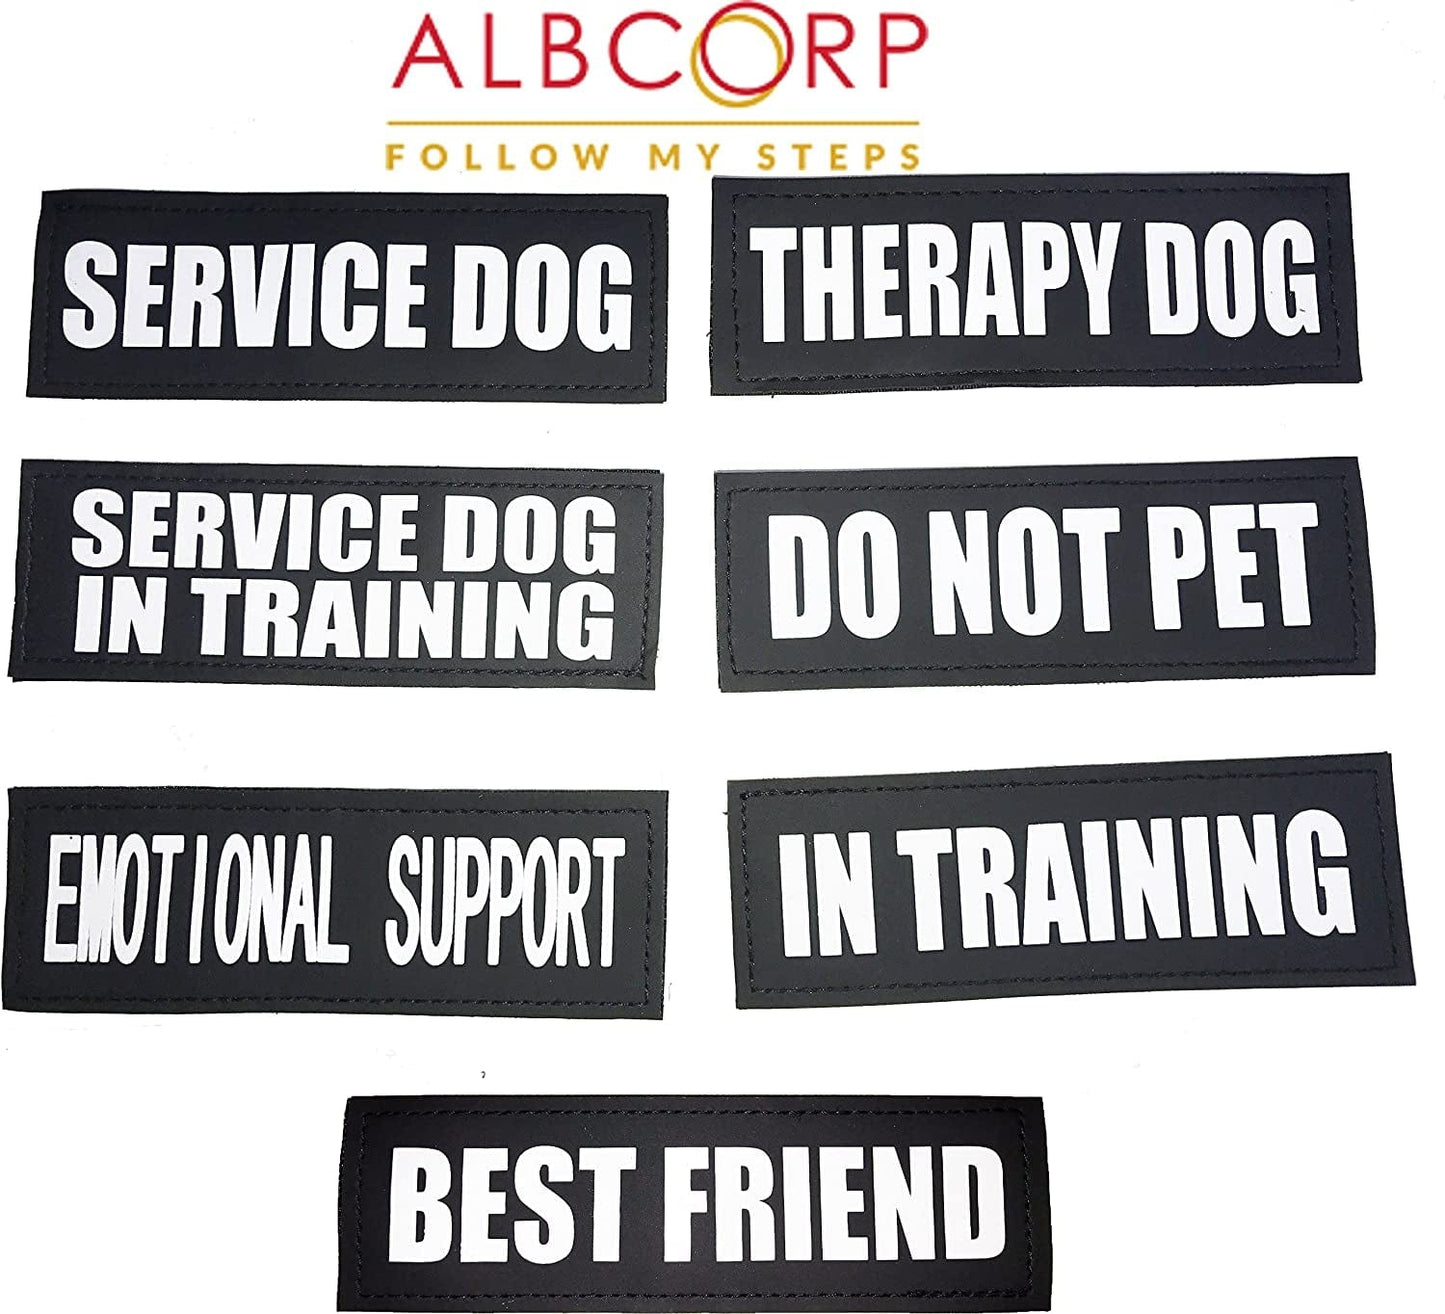 Albcorp Reflective Service Dog Patches with Hook Backing for Service Animal Vests /Harnesses Large (6 X 2) Inch Animals & Pet Supplies > Pet Supplies > Dog Supplies > Dog Apparel ALBCORP   